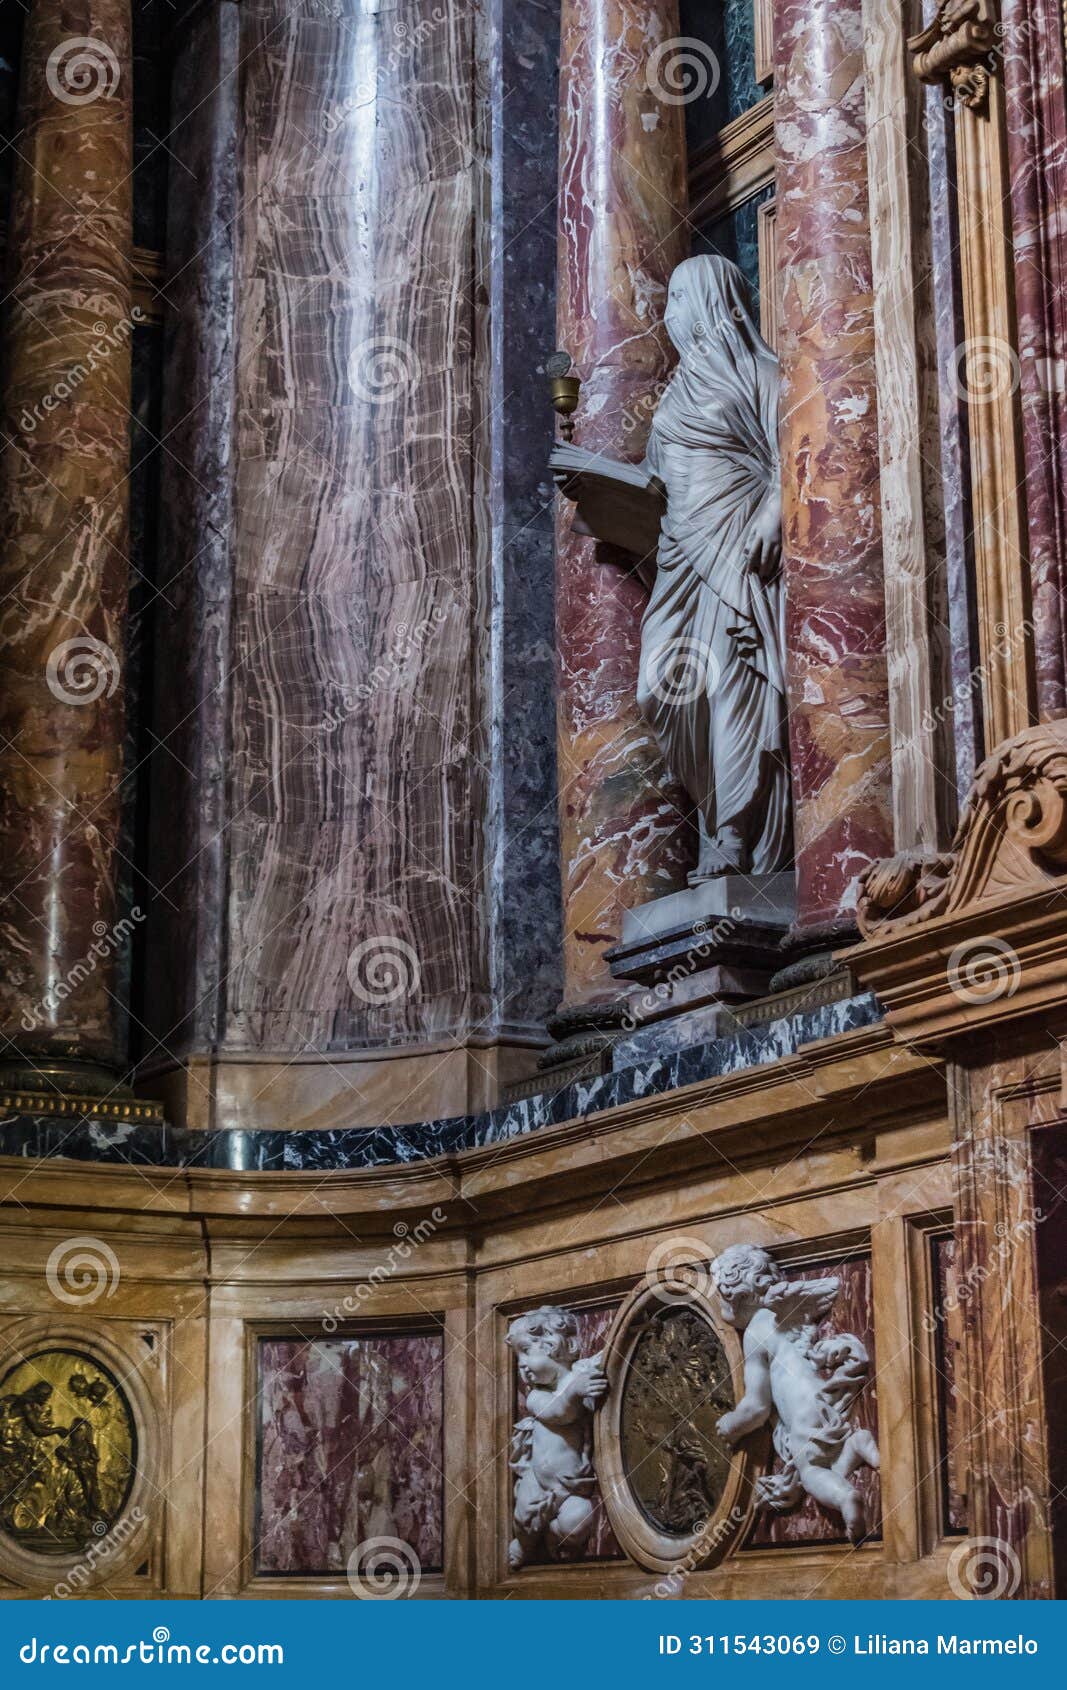 detail of church santa maria maddalena dei pazzi with veiled statue and colored marble, florence italy